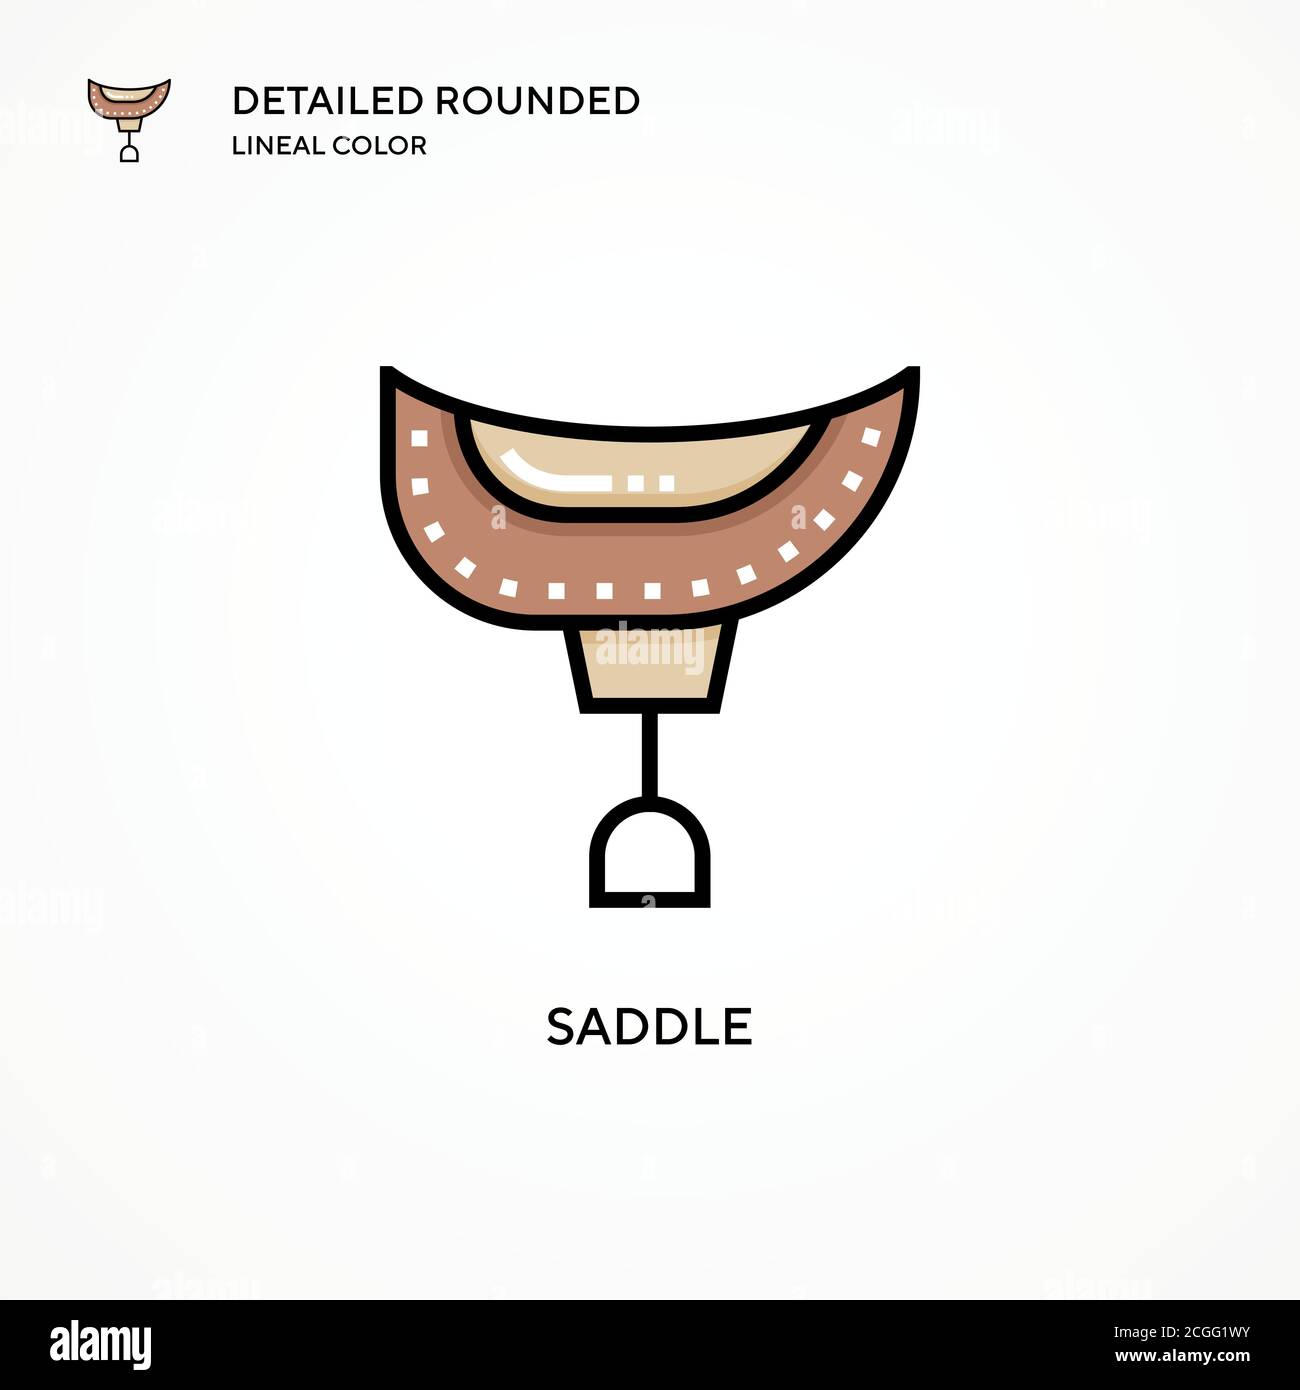 Saddle vector icon. Modern vector illustration concepts. Easy to edit and customize. Stock Vector